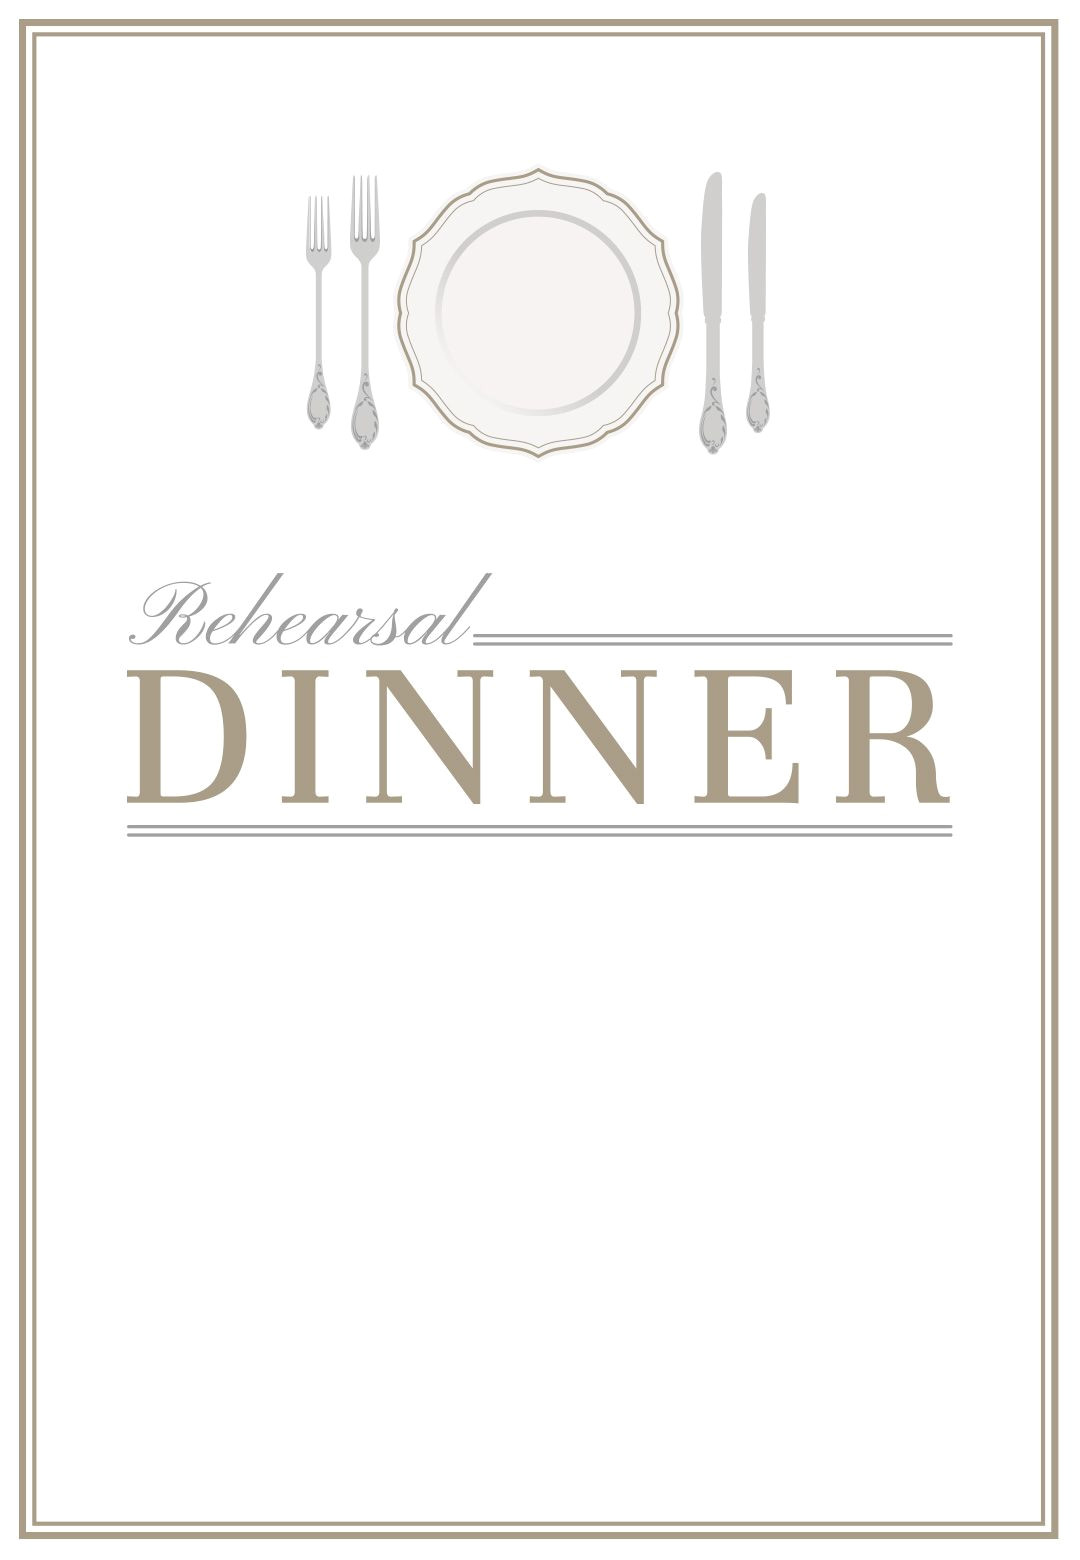 Dinner Party Invitation Template Word Elegant Setting Free Printable Rehearsal Dinner Party